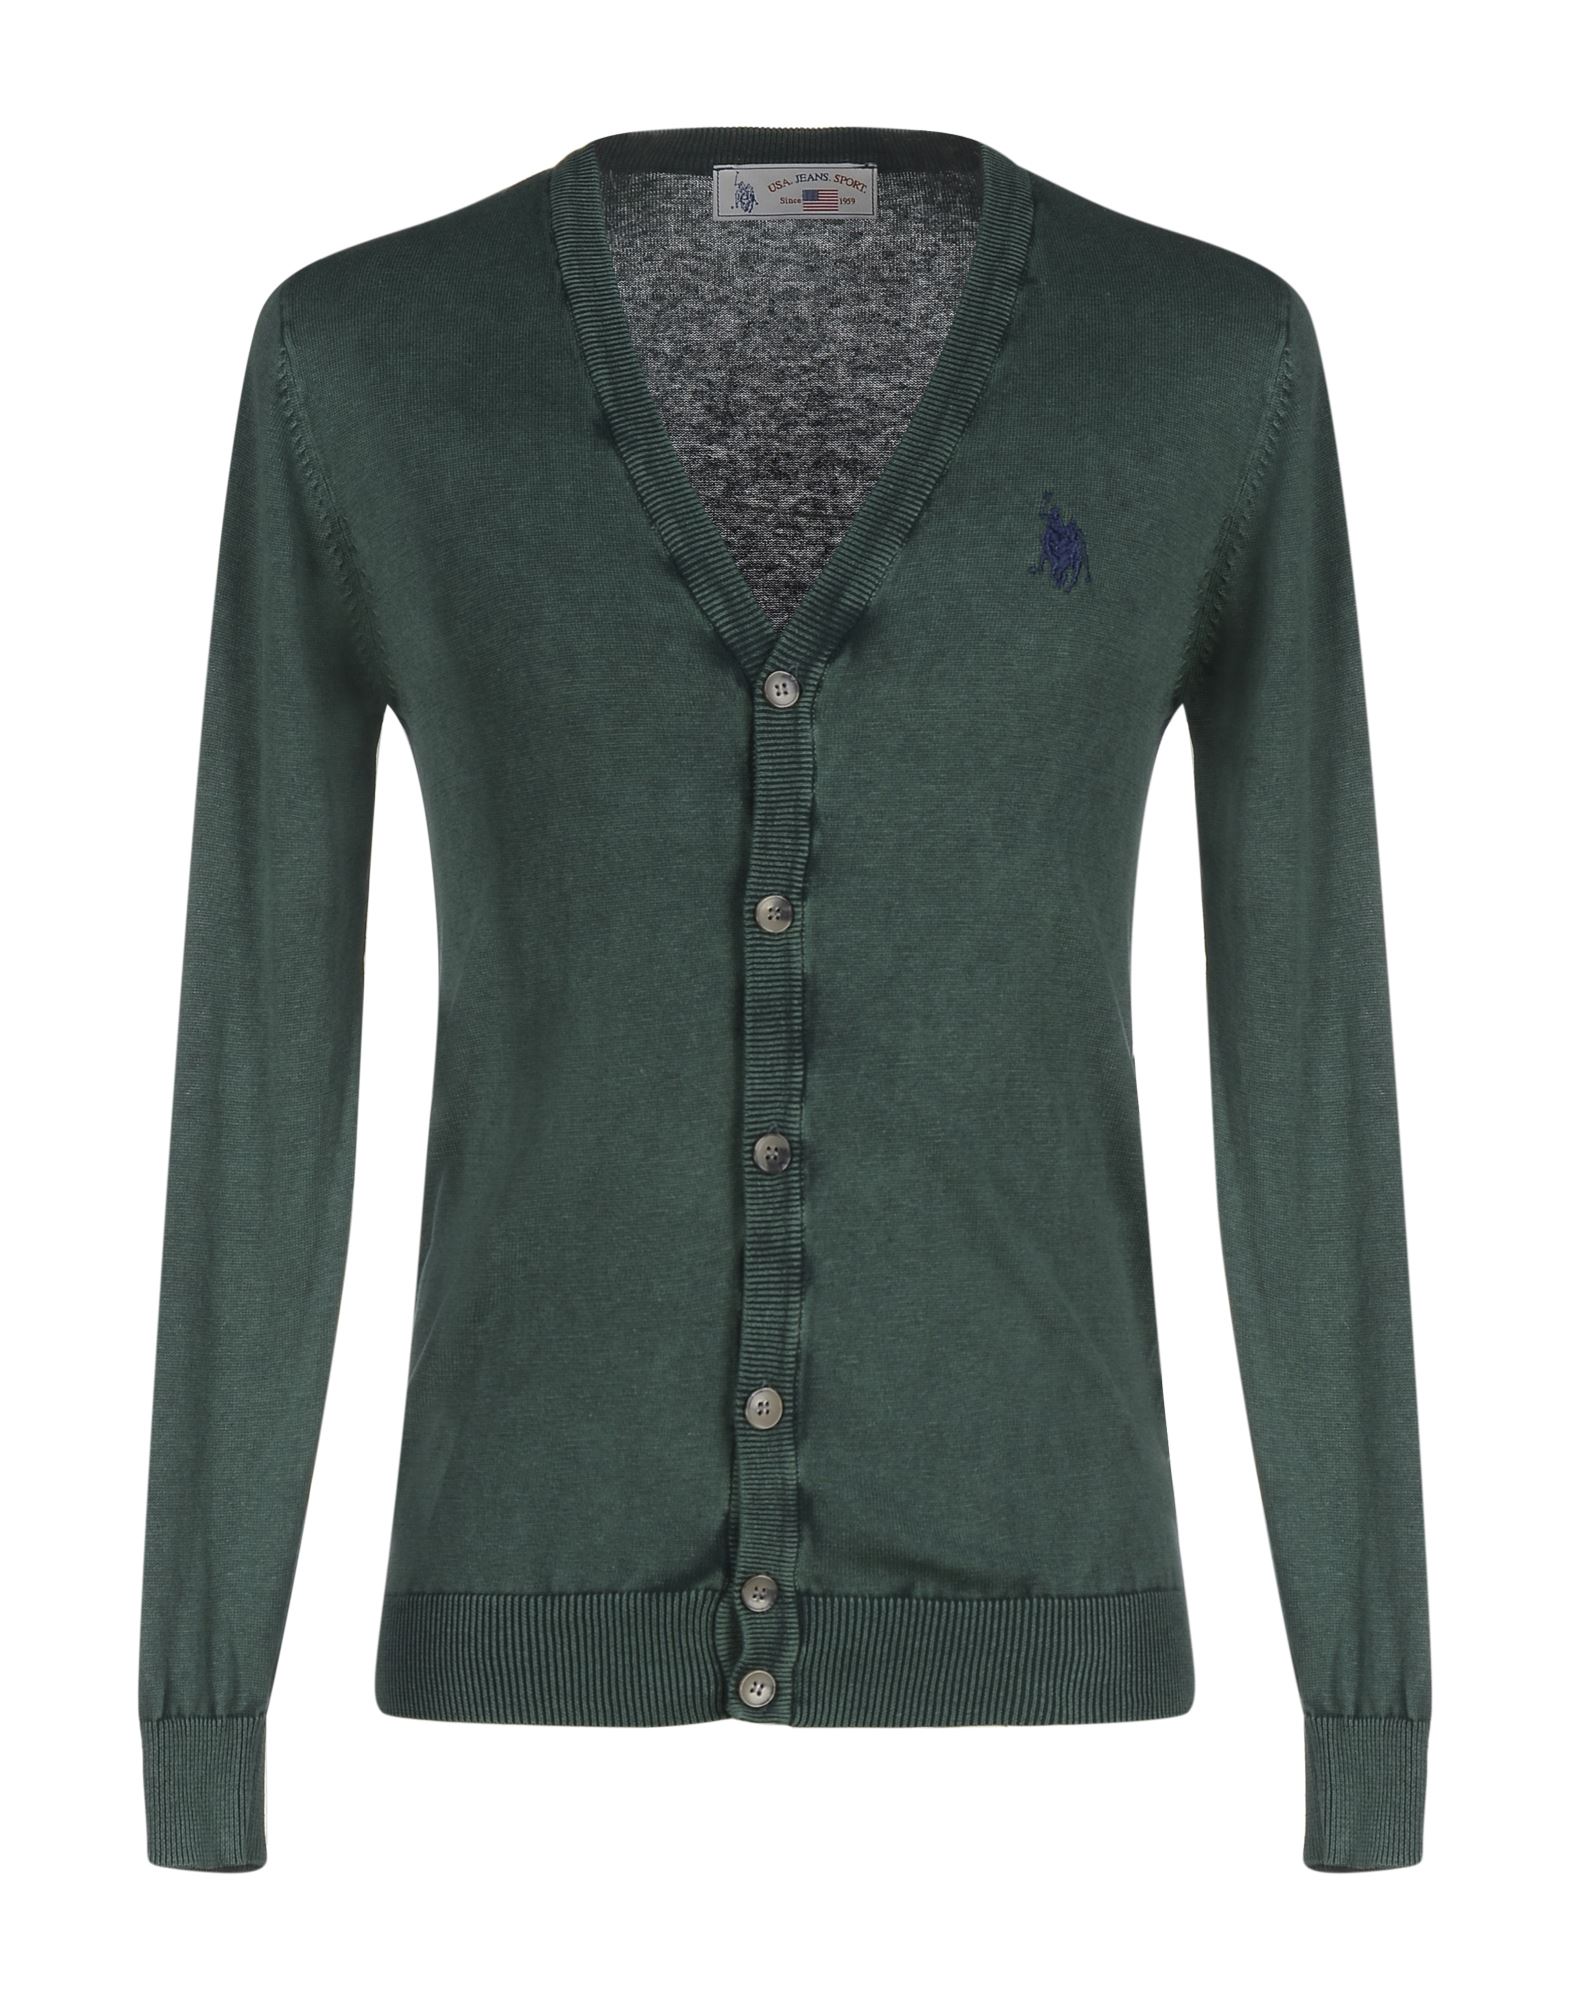 Usa.jeans.sport Usa. Jeans. Sport Cardigans In Green